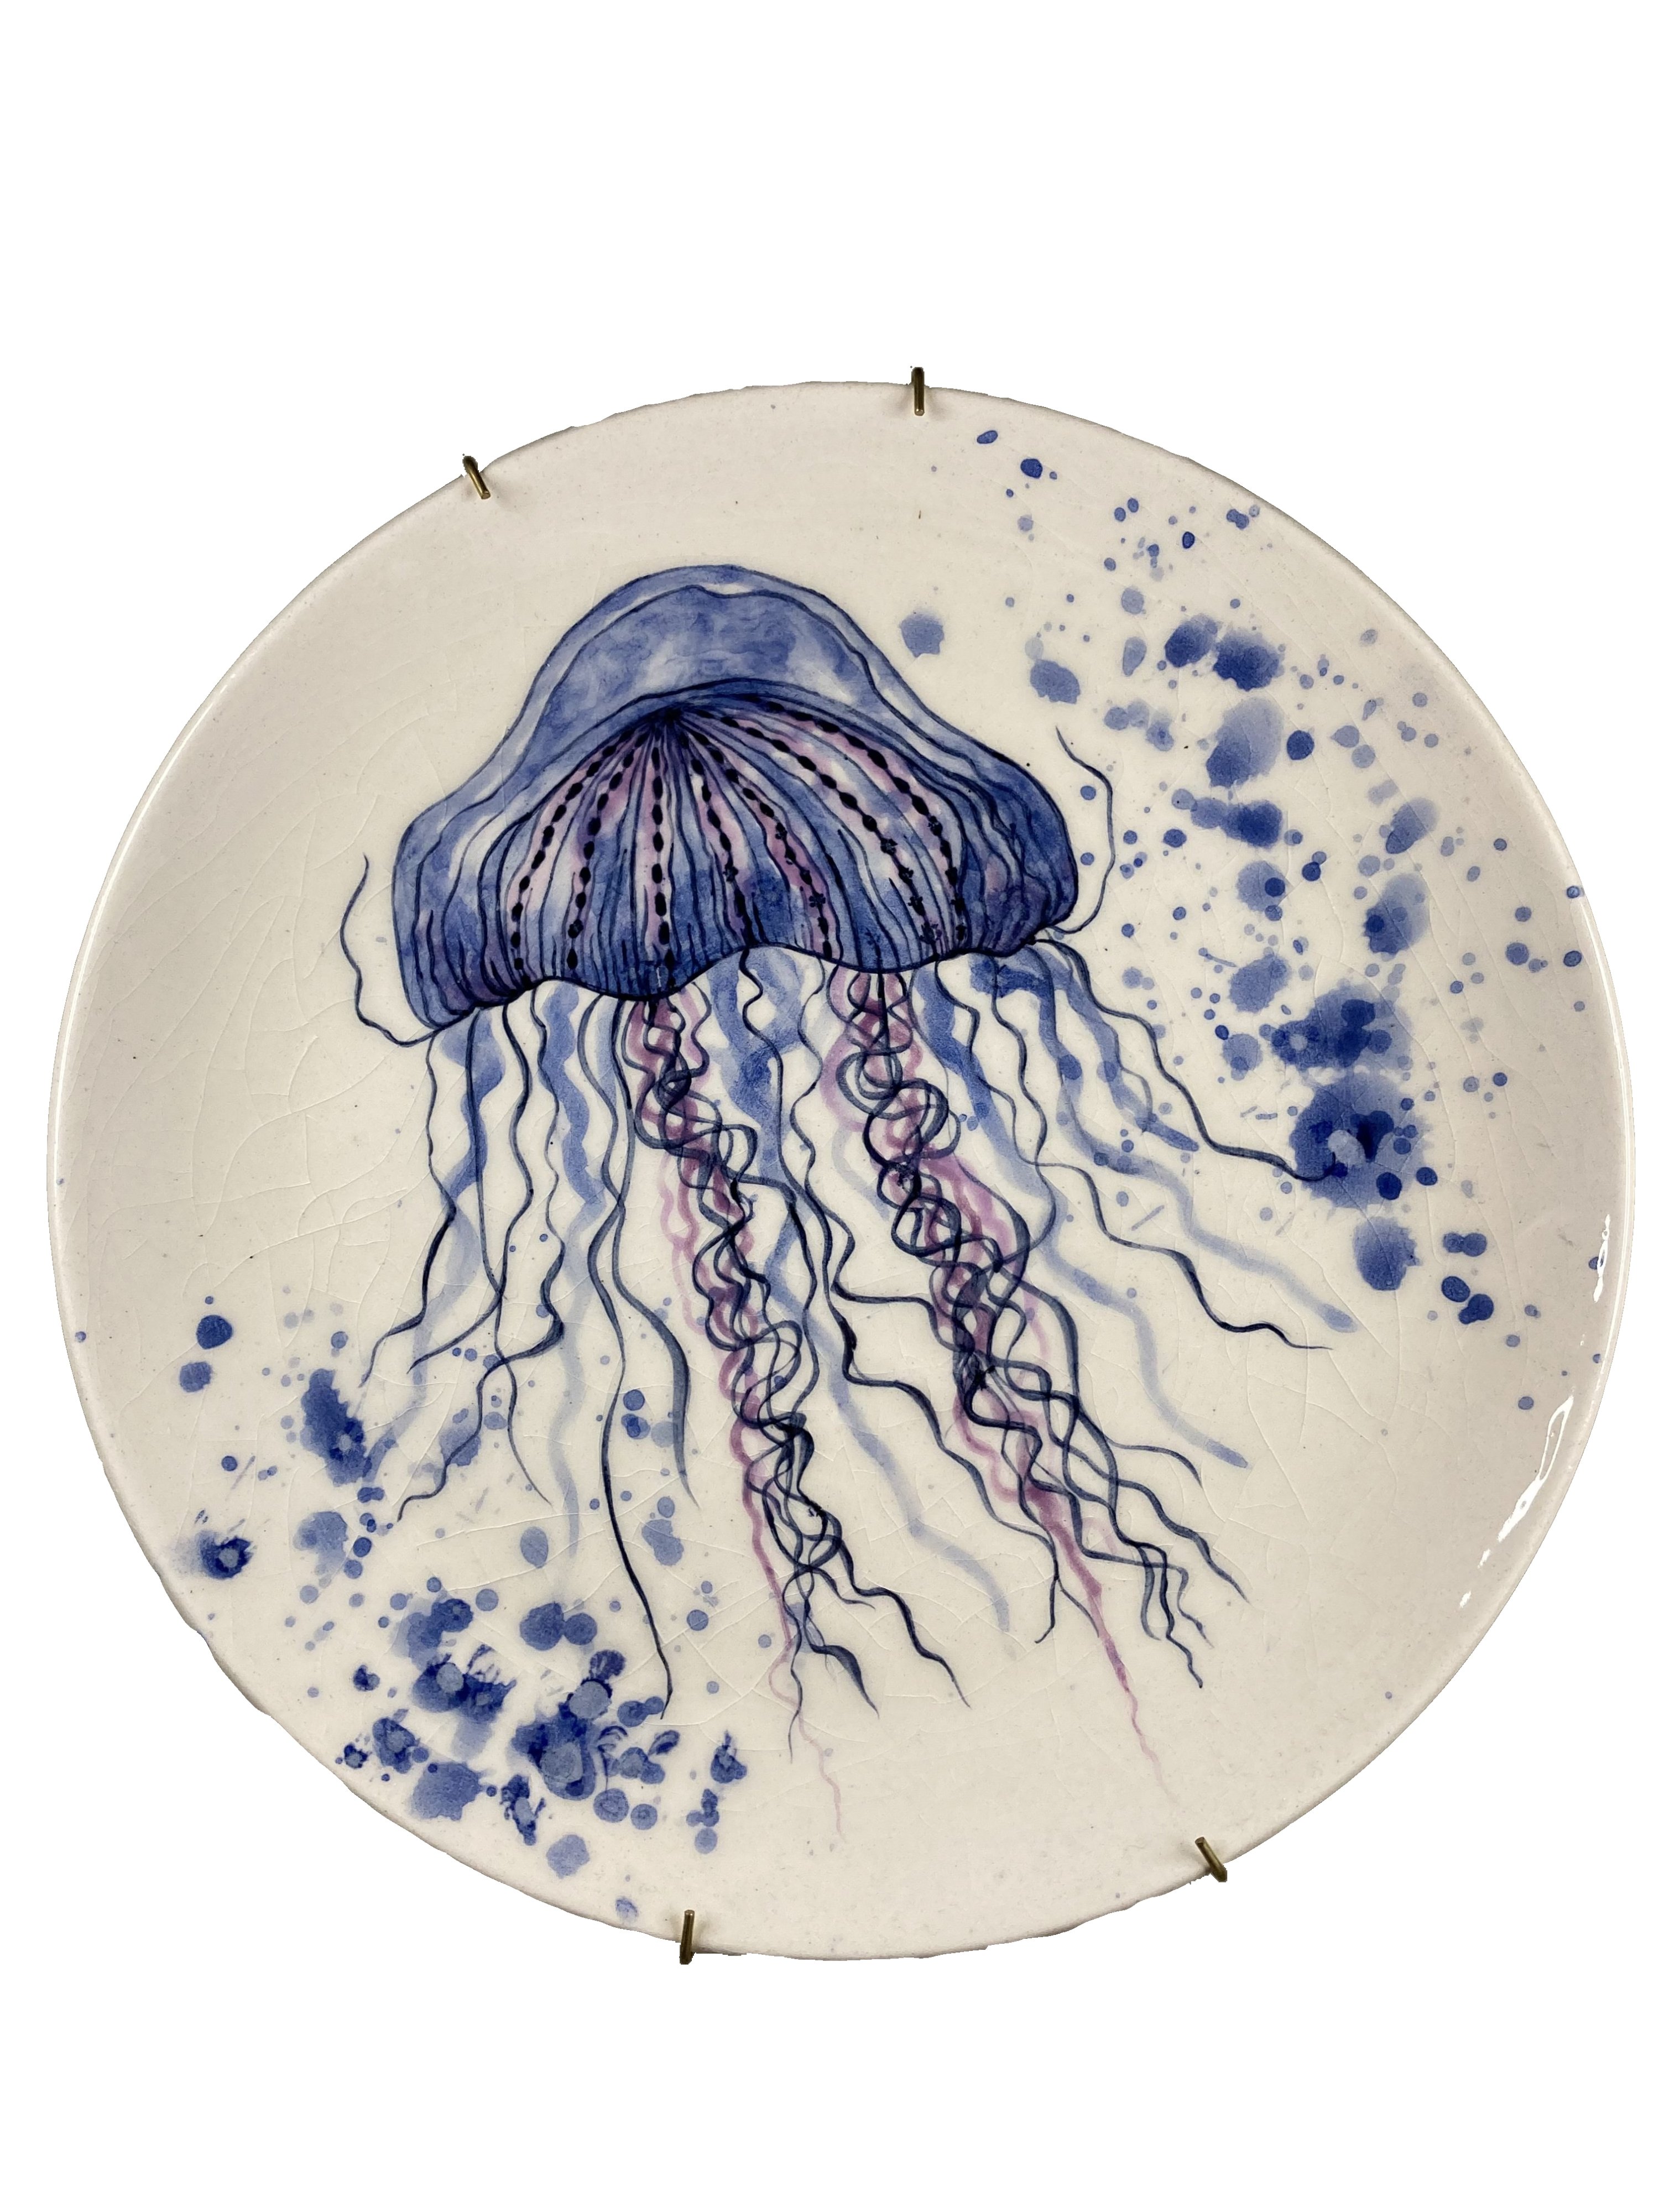 Cansu Saraç Engin, 'Jellyfish', ceramic, 25 by 25 centimeters. (Courtesy of YEE London) 